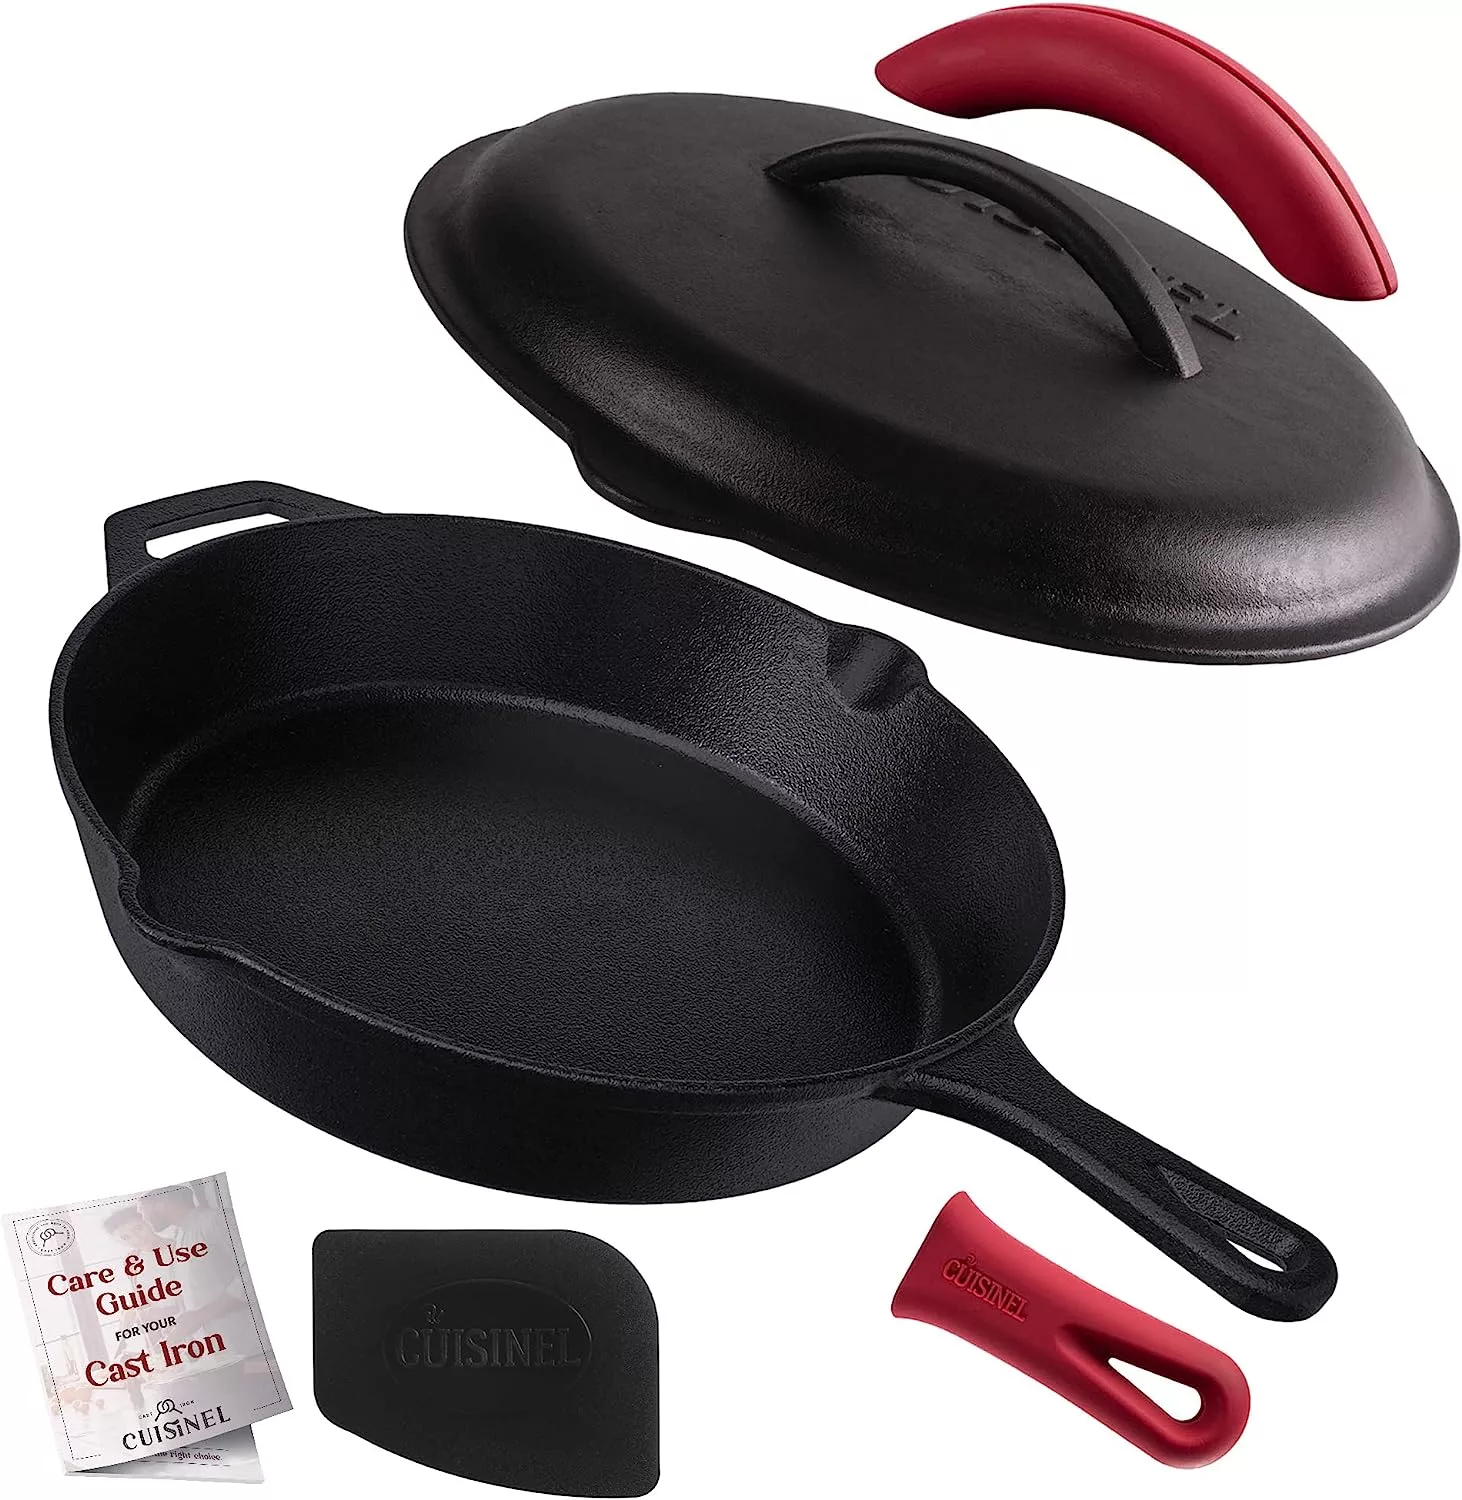 Cuisinel Cast Iron Pre-Seasoned Covered Frying Pan Set